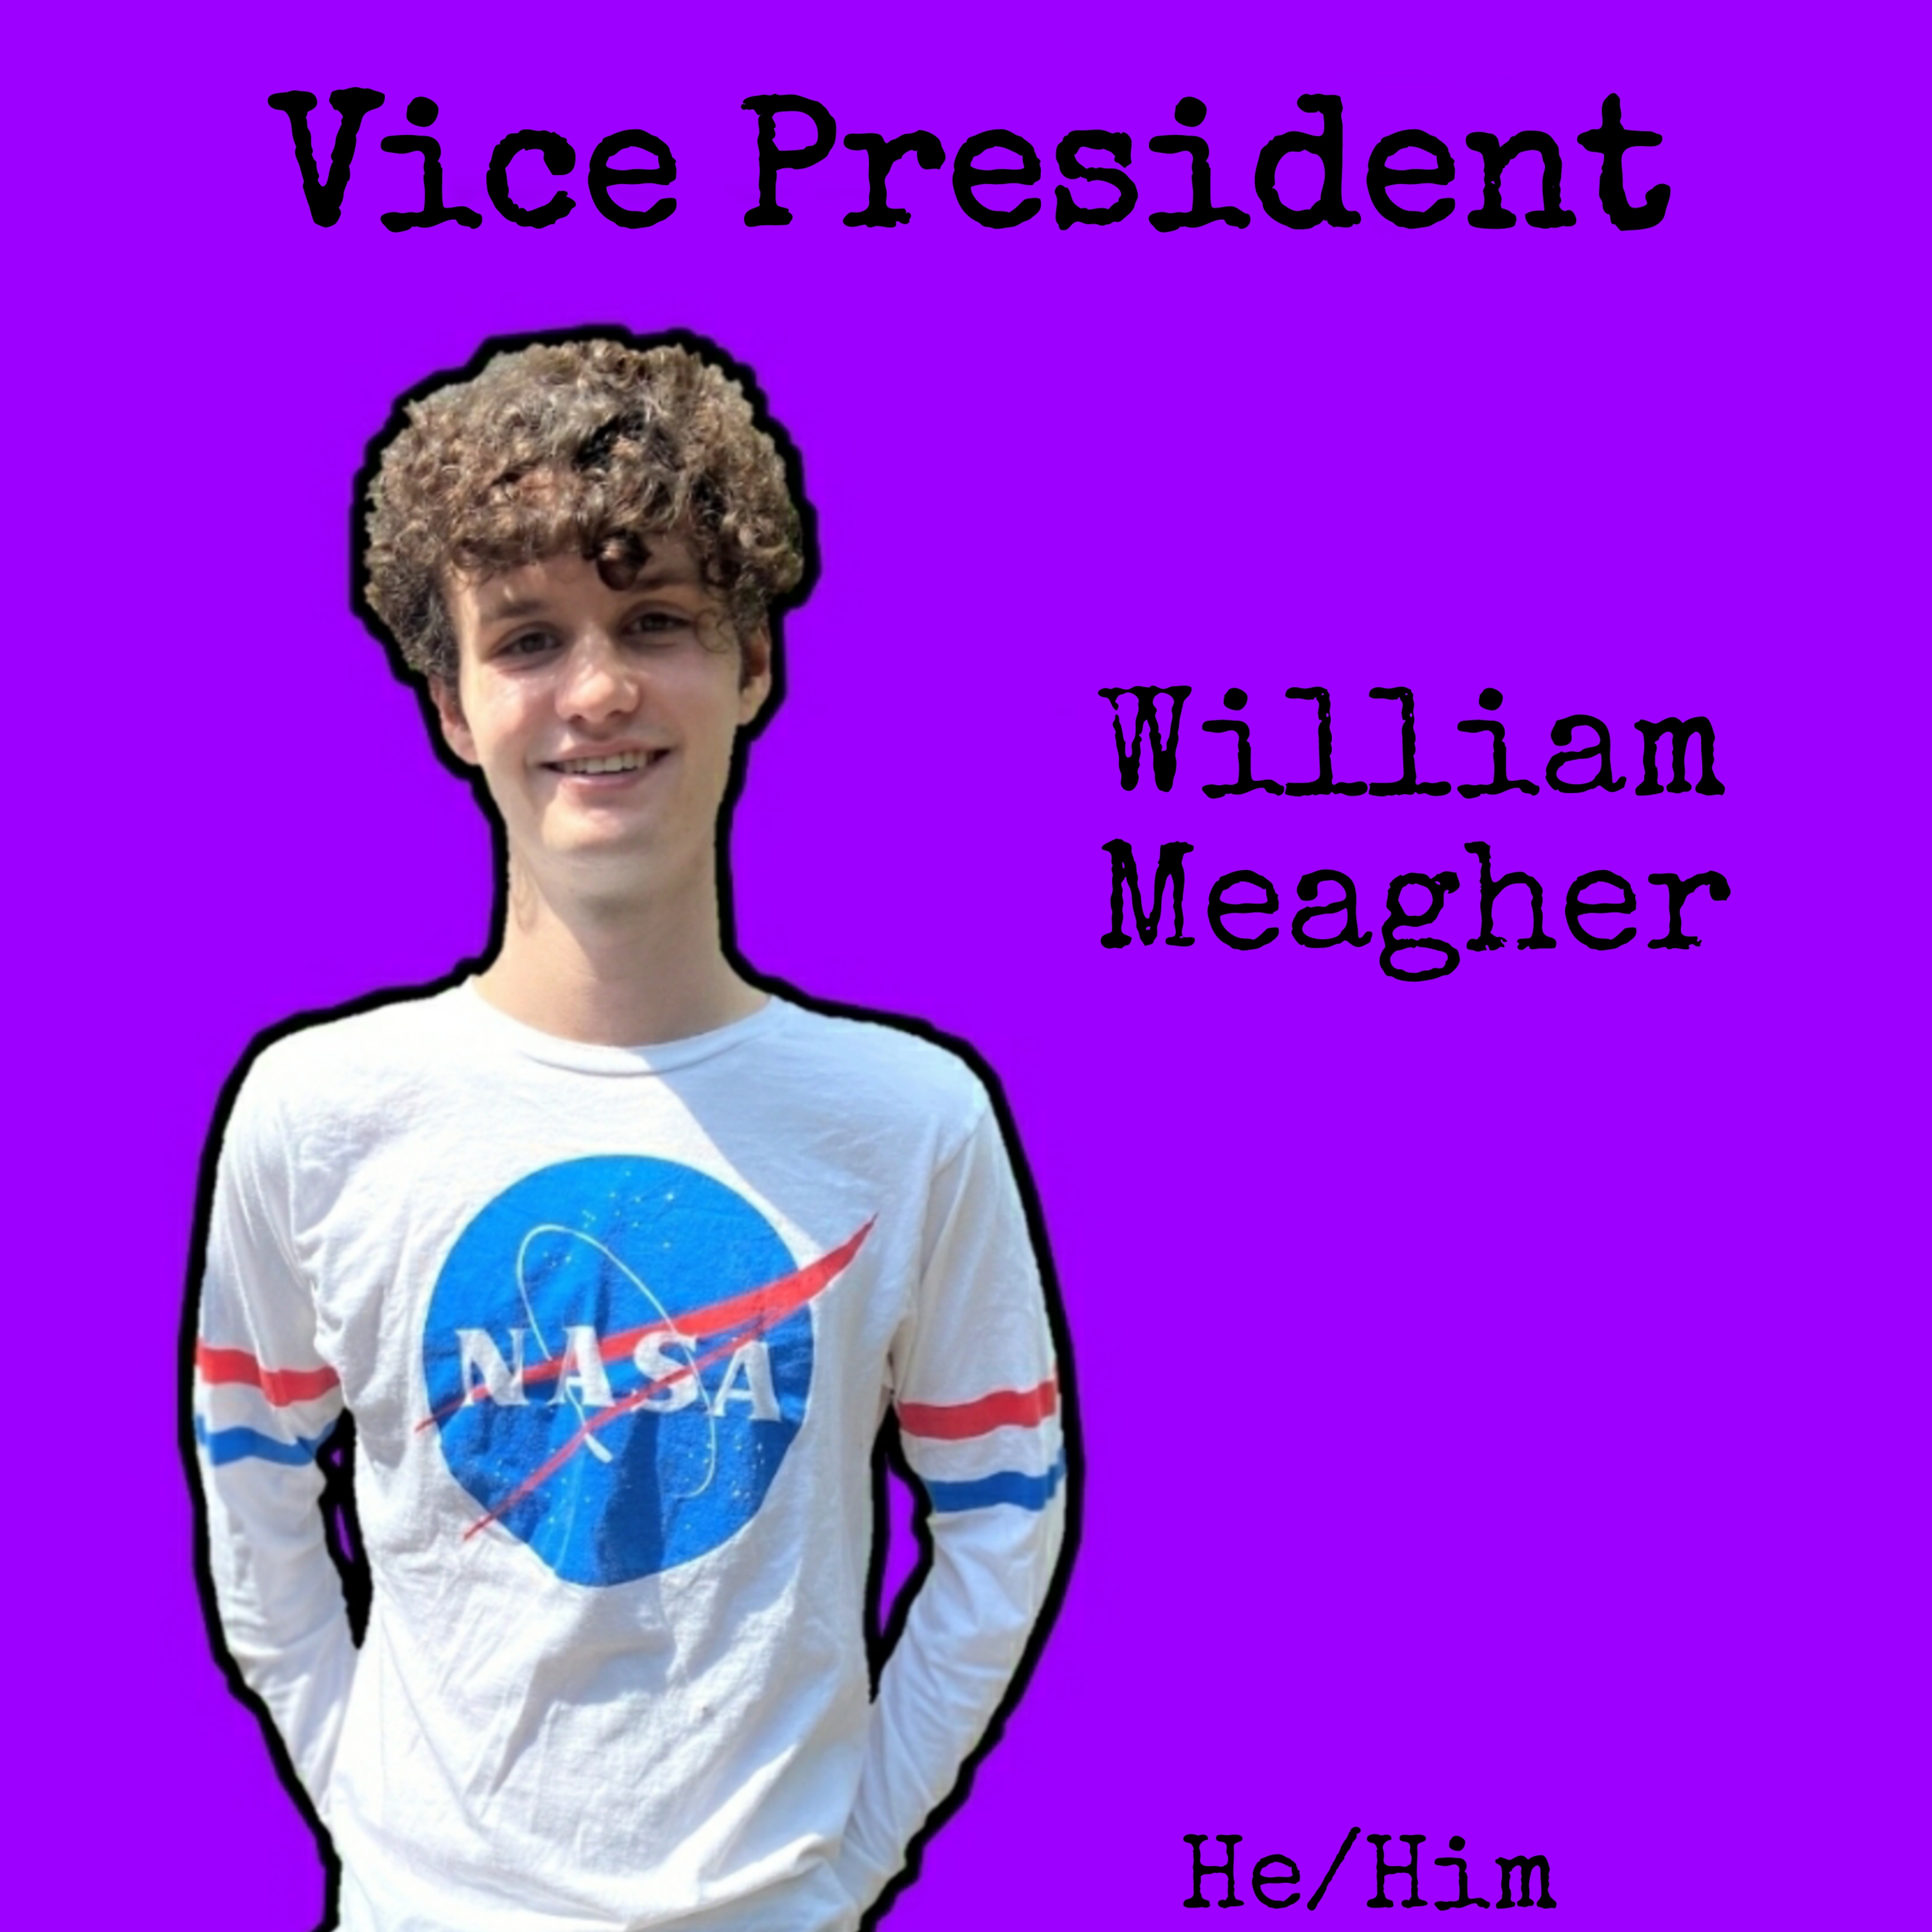 William Meagher - Vice President